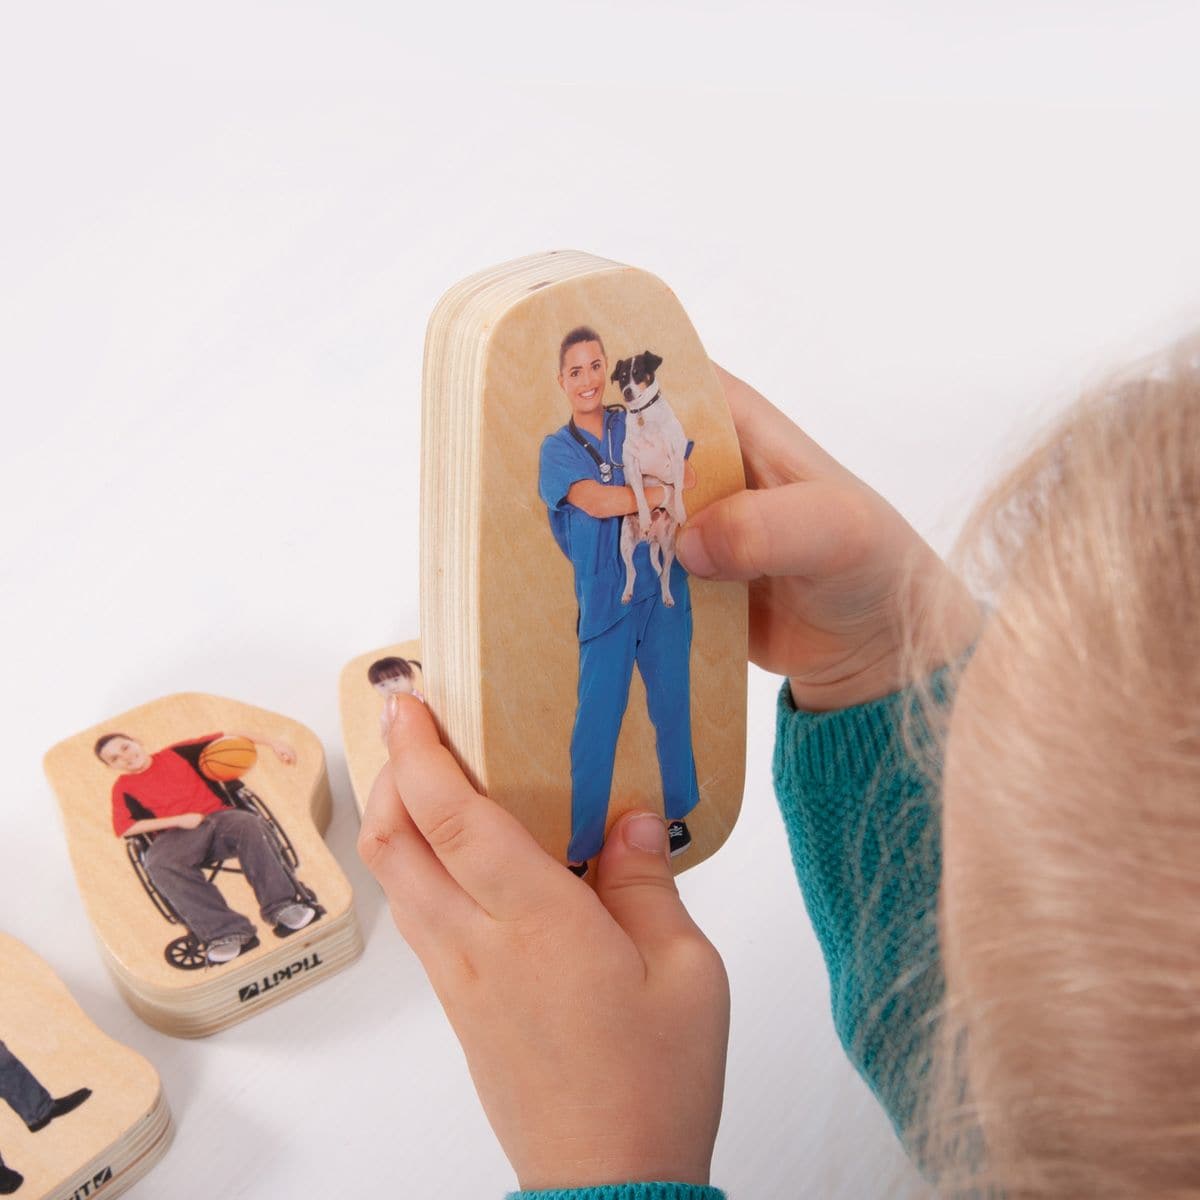 Wooden Community People Blocks, The Wooden Community People Blocks are made up of chunky wooden blocks with colour printed on both sides with real images of people from a range of communities, perfect for young children to engage in imaginative play and develop their descriptive language skills. The 20mm birch Wooden Community People Blocks are smooth to touch and easy for small children to handle. Having realistic images will enable younger children to recognise and relate to the characteristics of other p